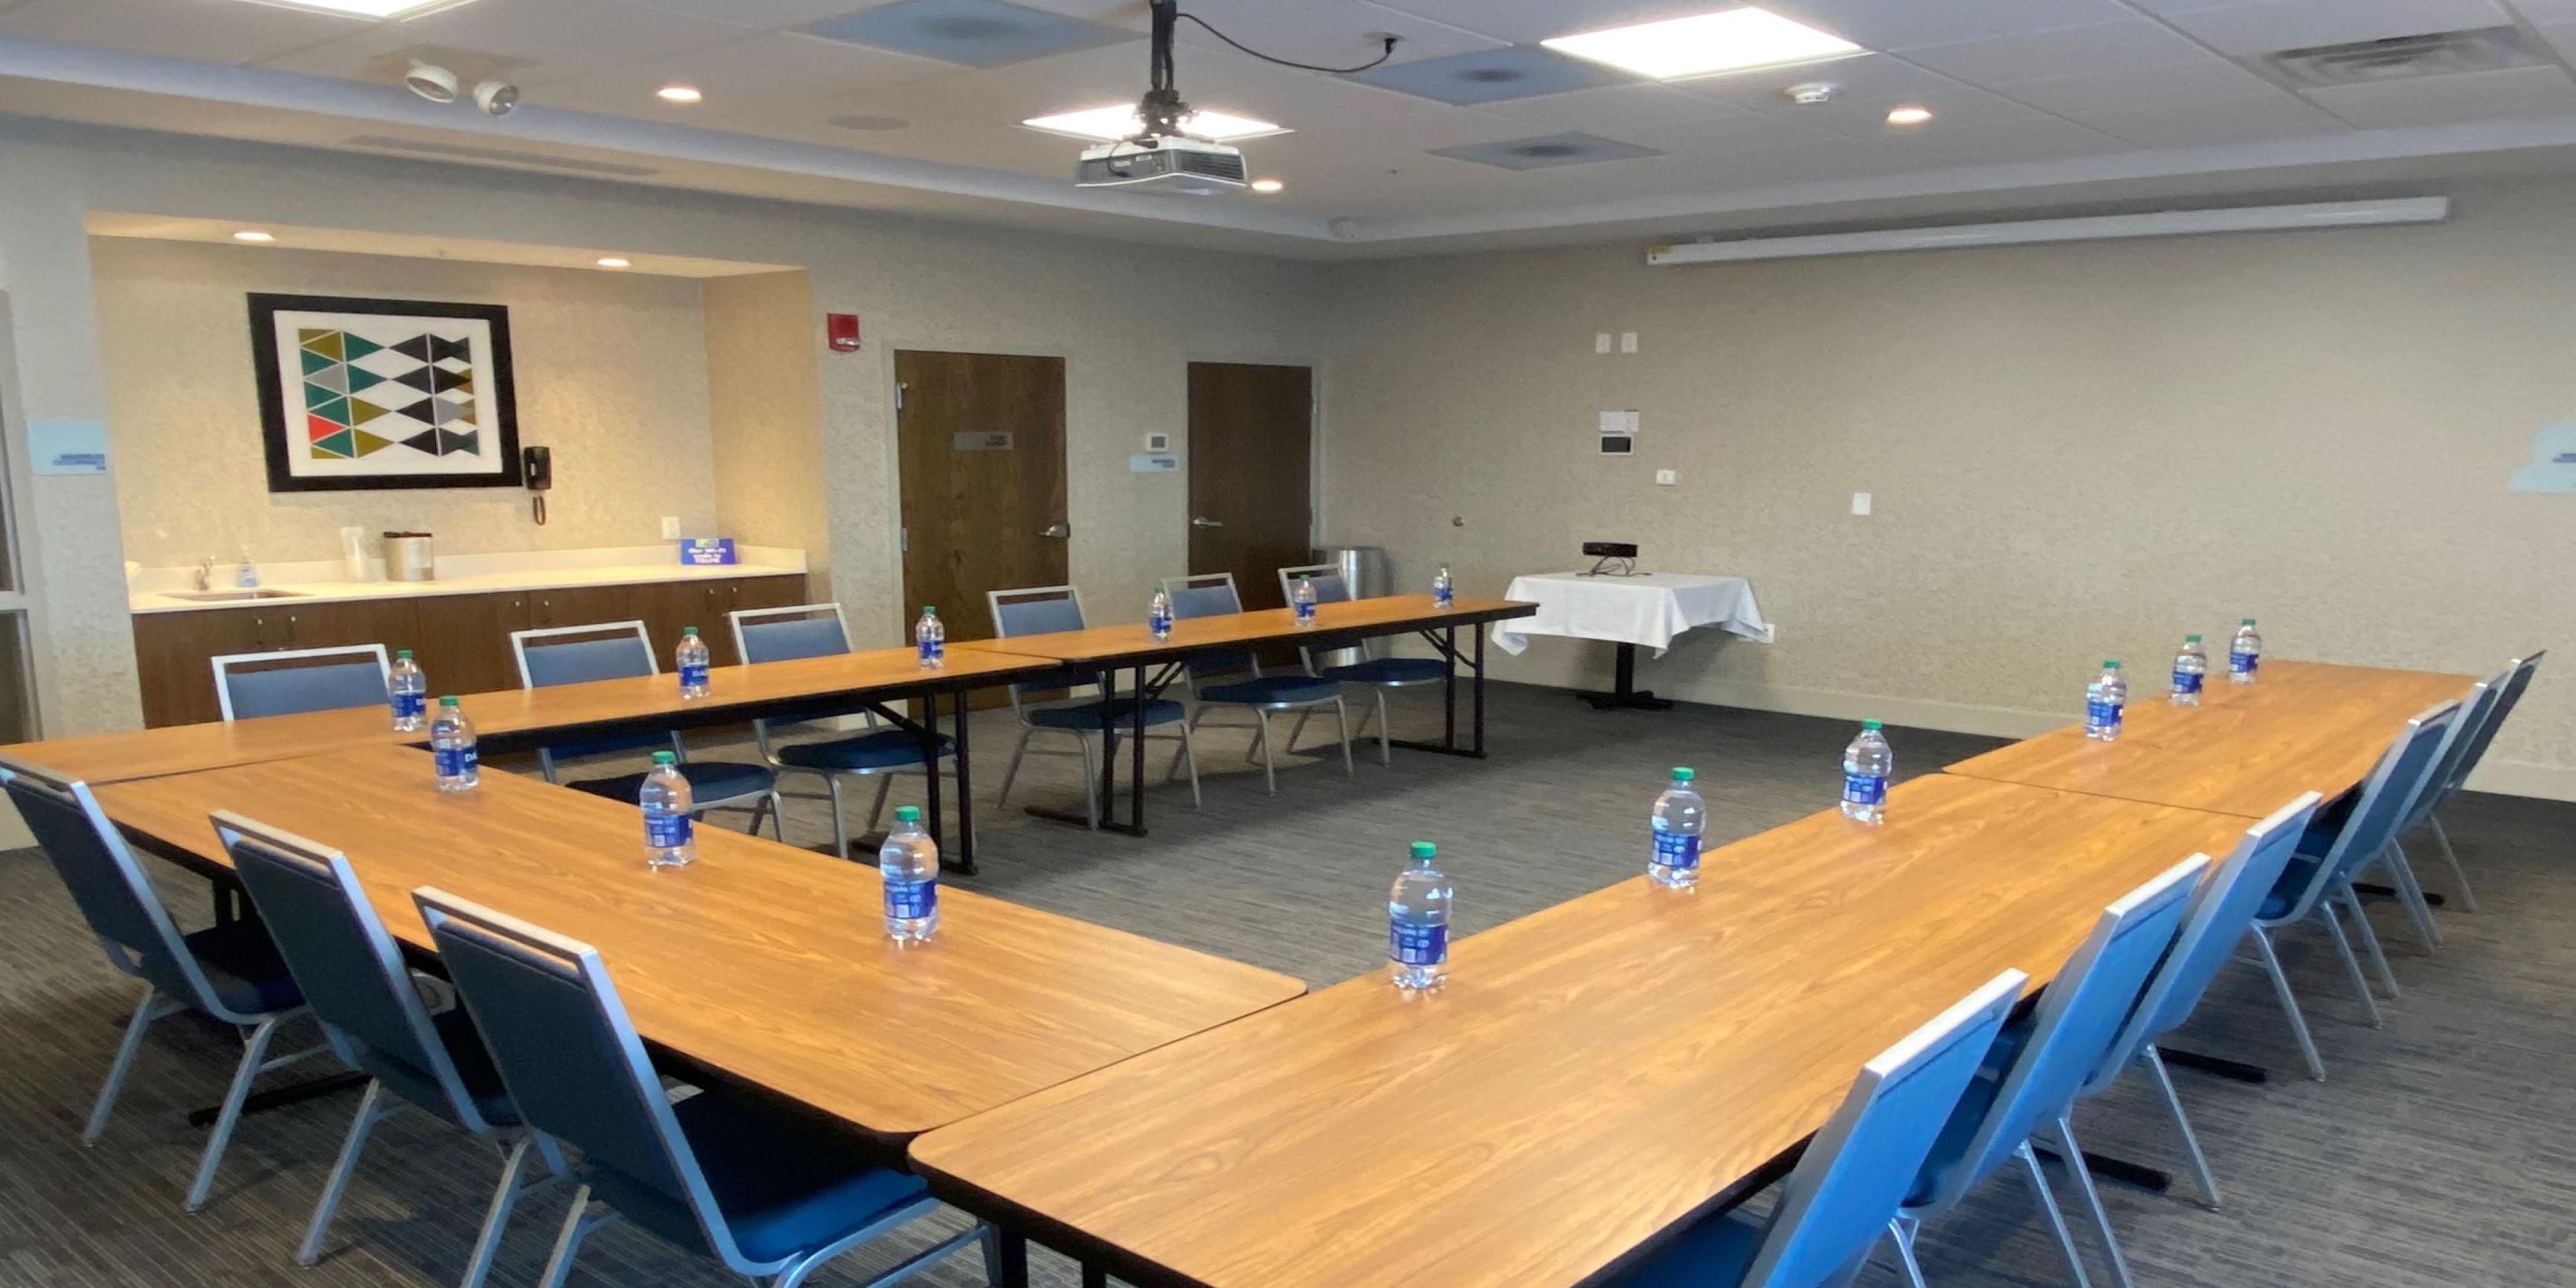 Having a meeting? We have options for you on site with our meeting room and sales team. Please contact us today!